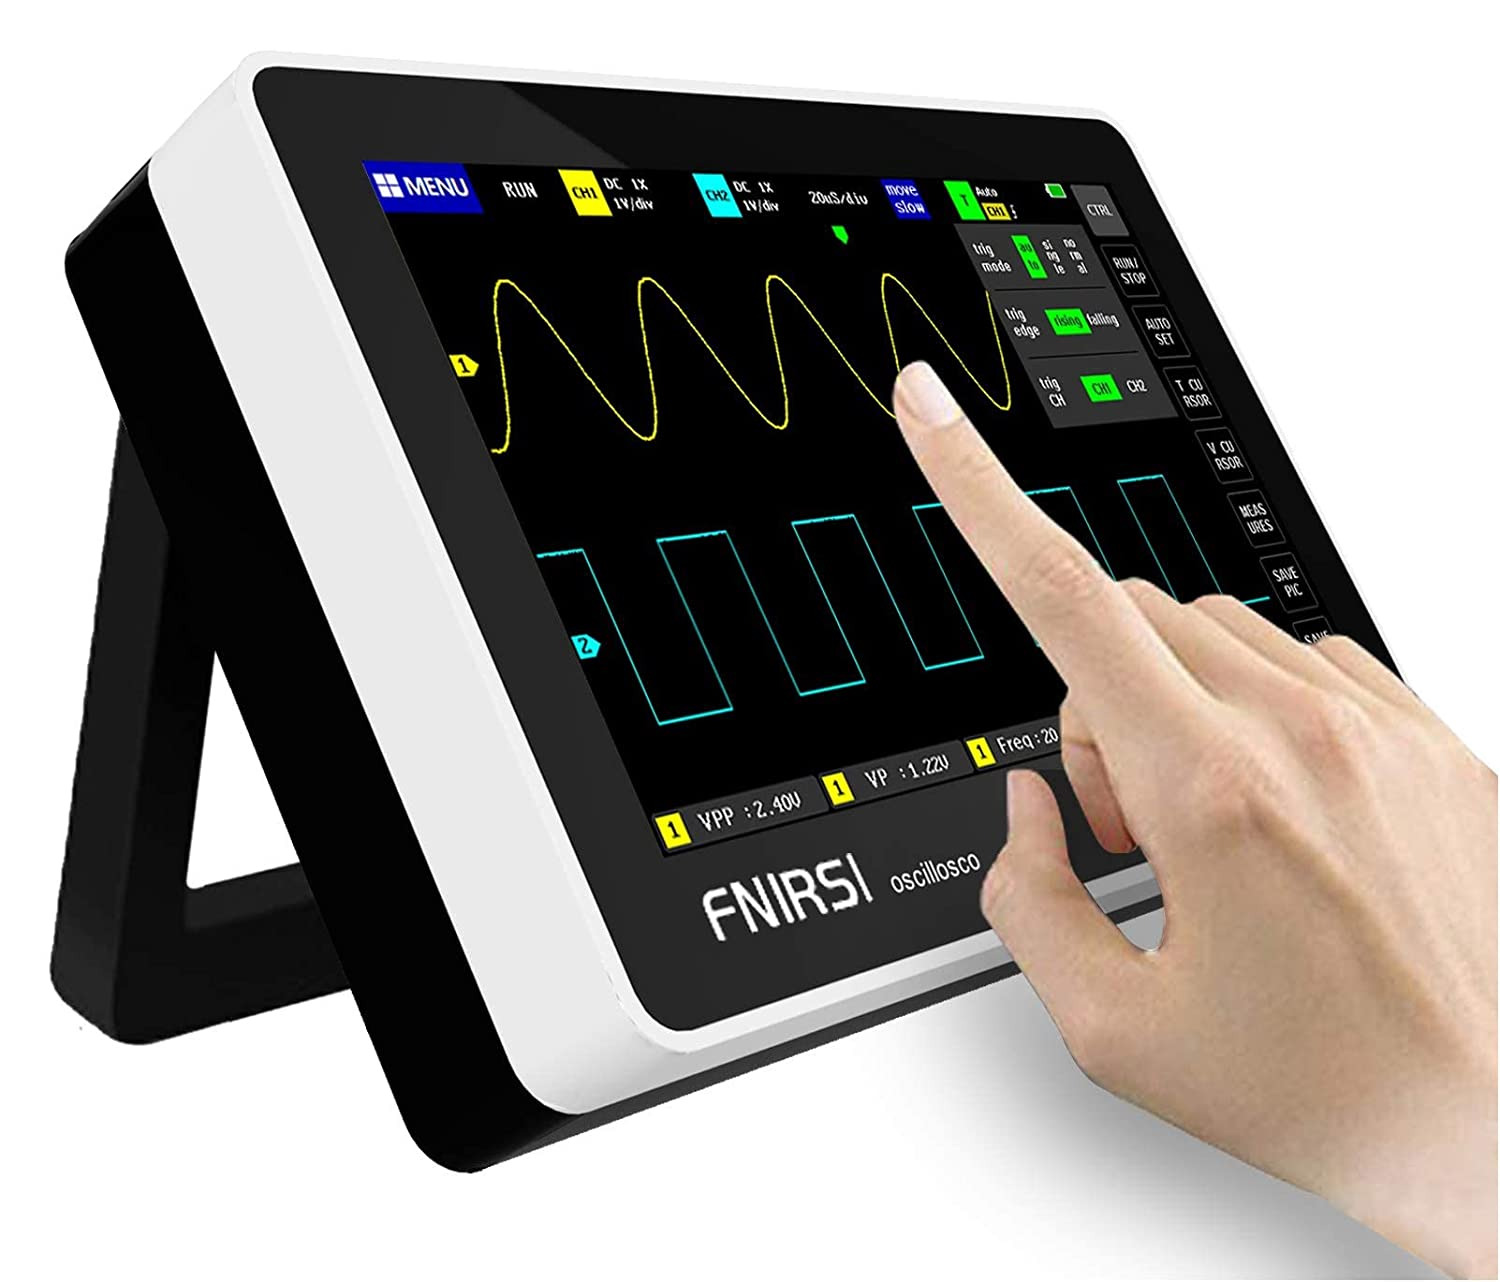 Tablet Oscilloscope,With 2 Channel 100Mhz Bandwidth 1Gsa/S Sampling Rate Oscillo